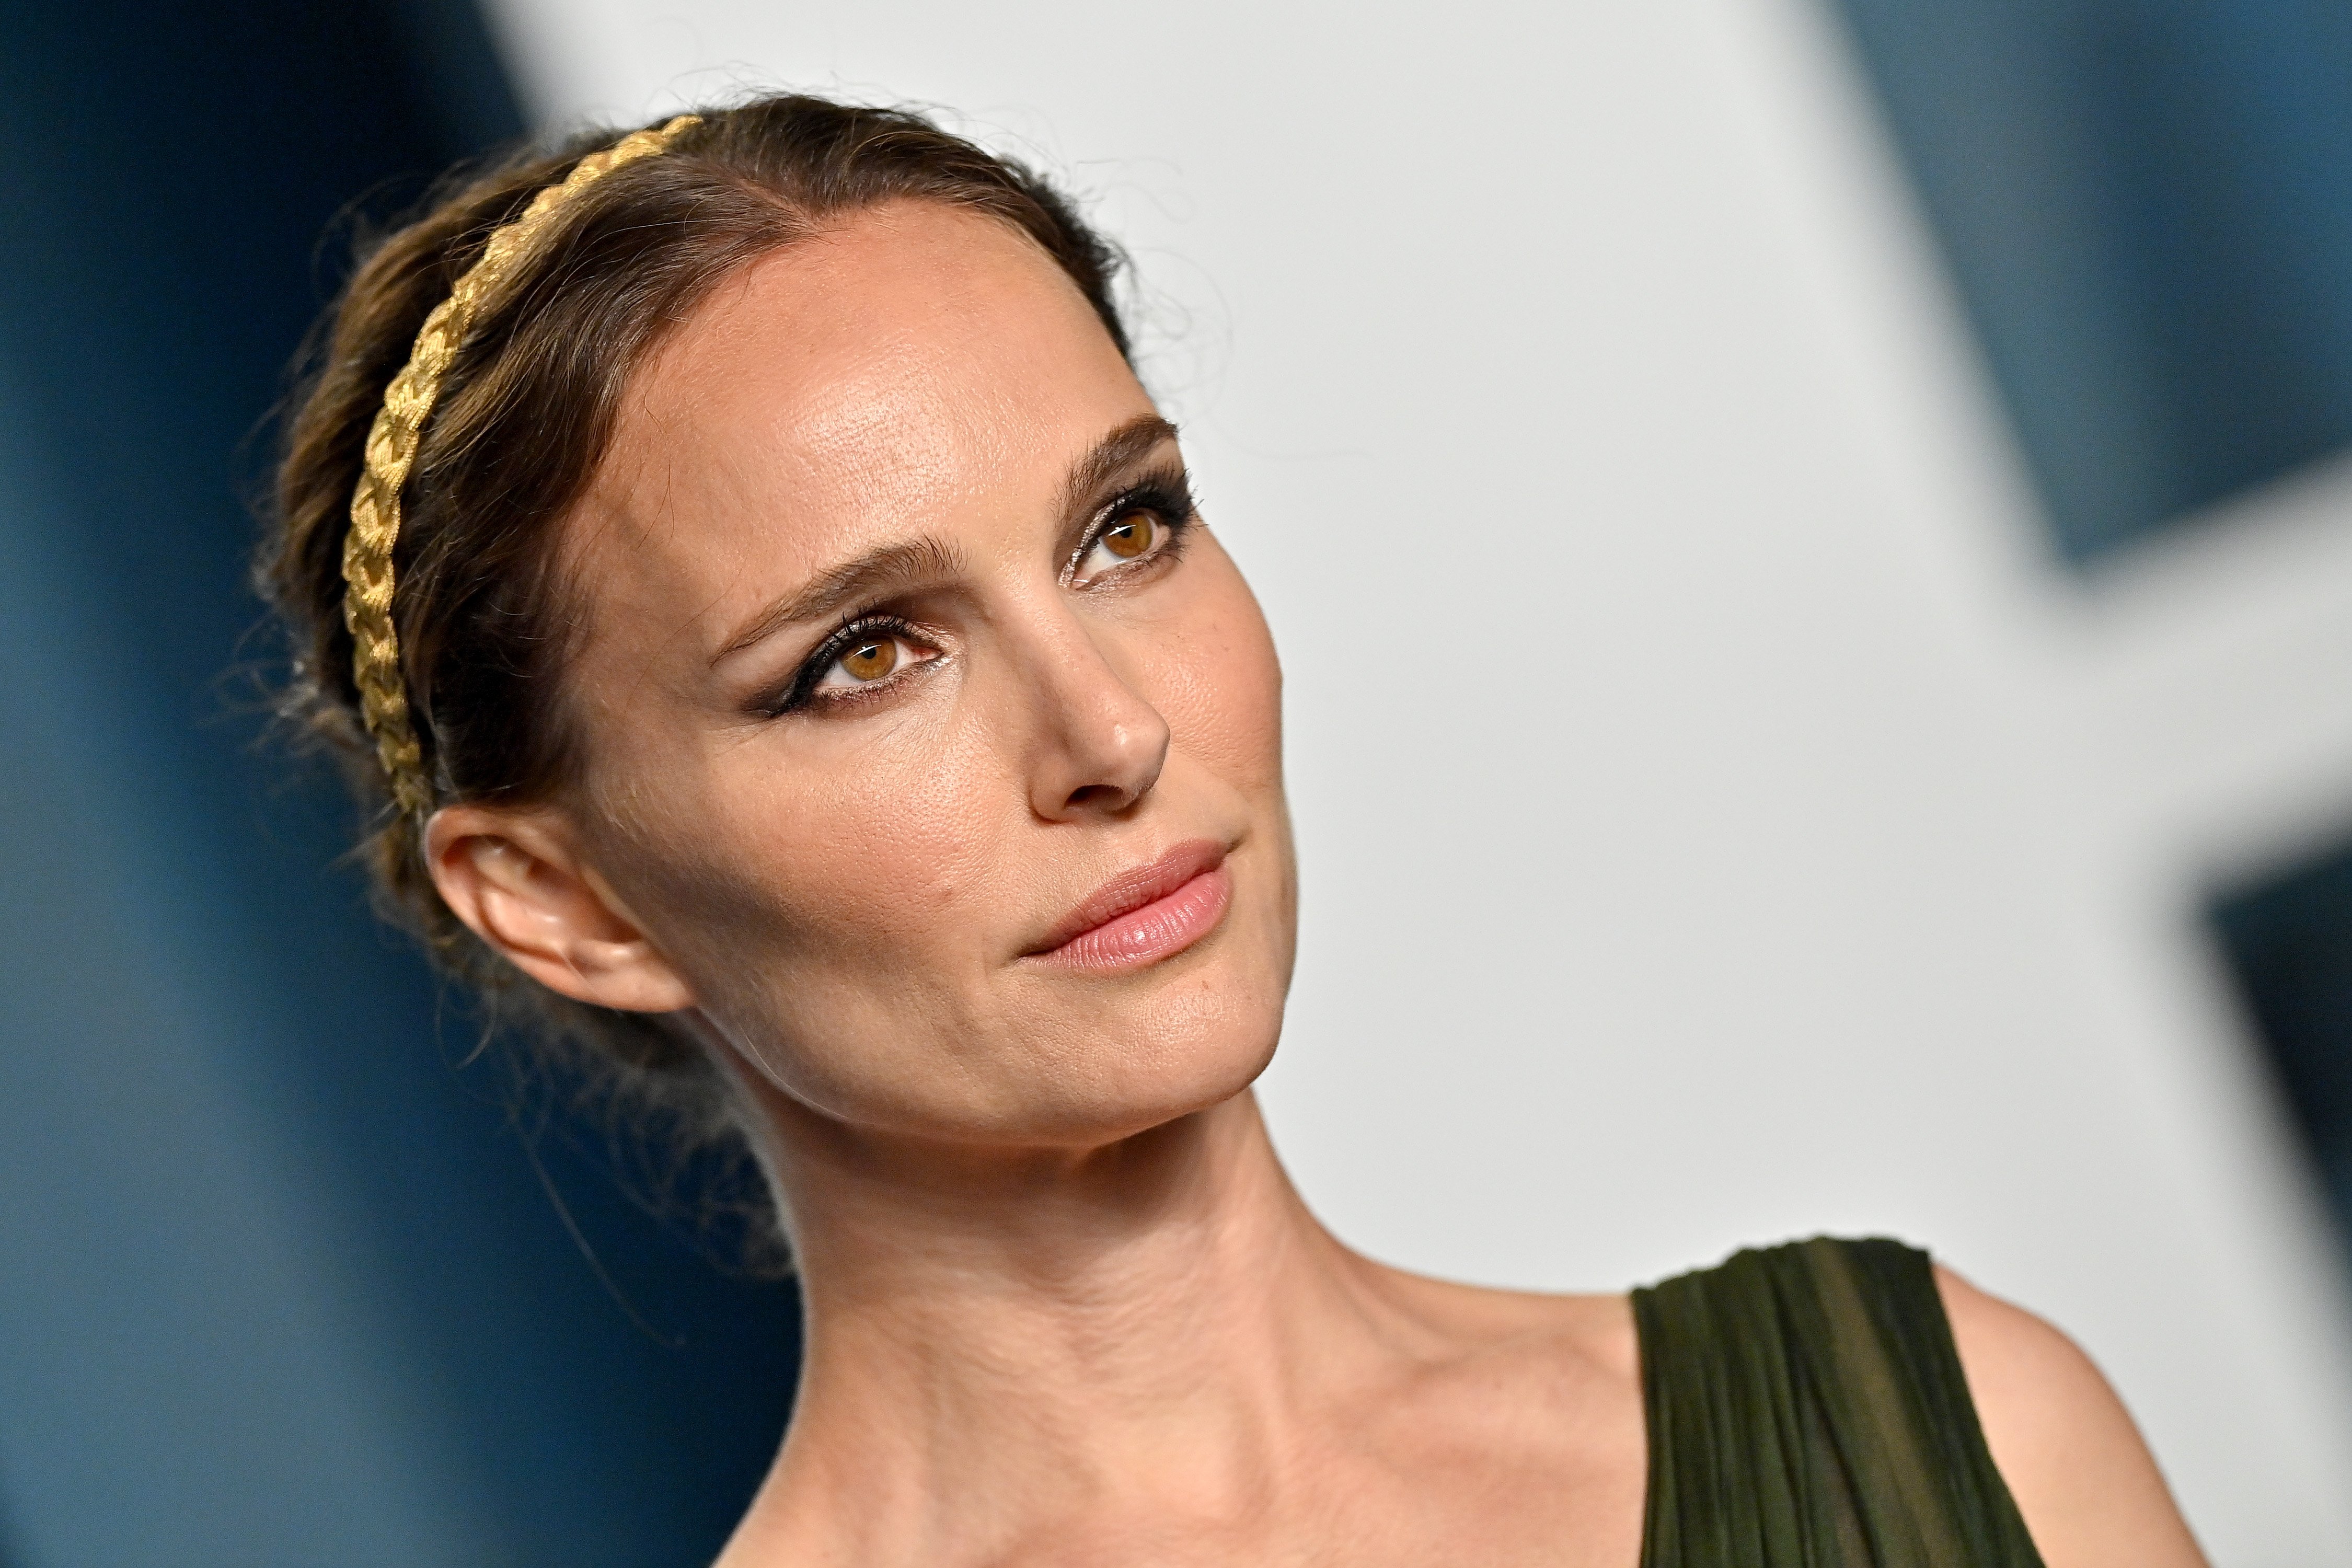 Natalie Portman, who stars in the 'Thor: Love and Thunder' trailer, wears a dark green dress and gold braided headband.